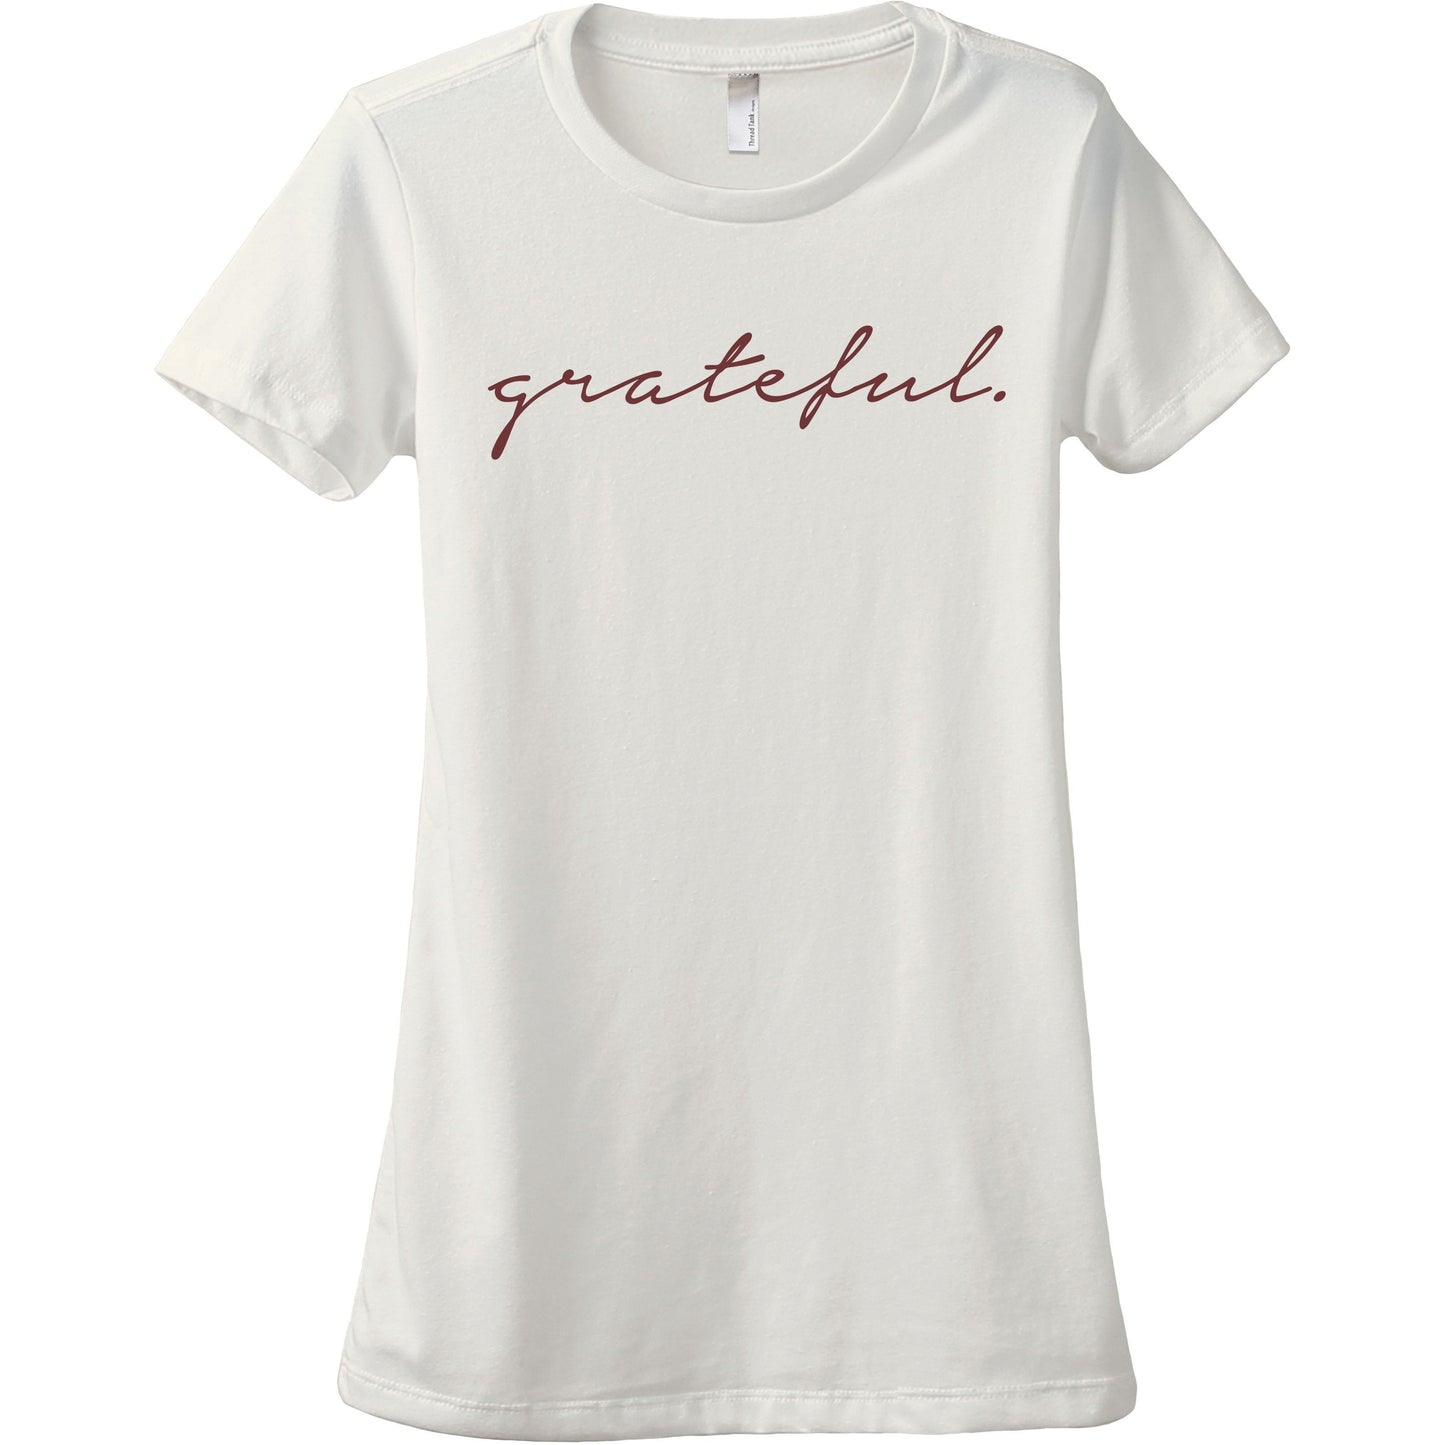 Grateful Women's Relaxed Crewneck T-Shirt Top Tee Vintage White